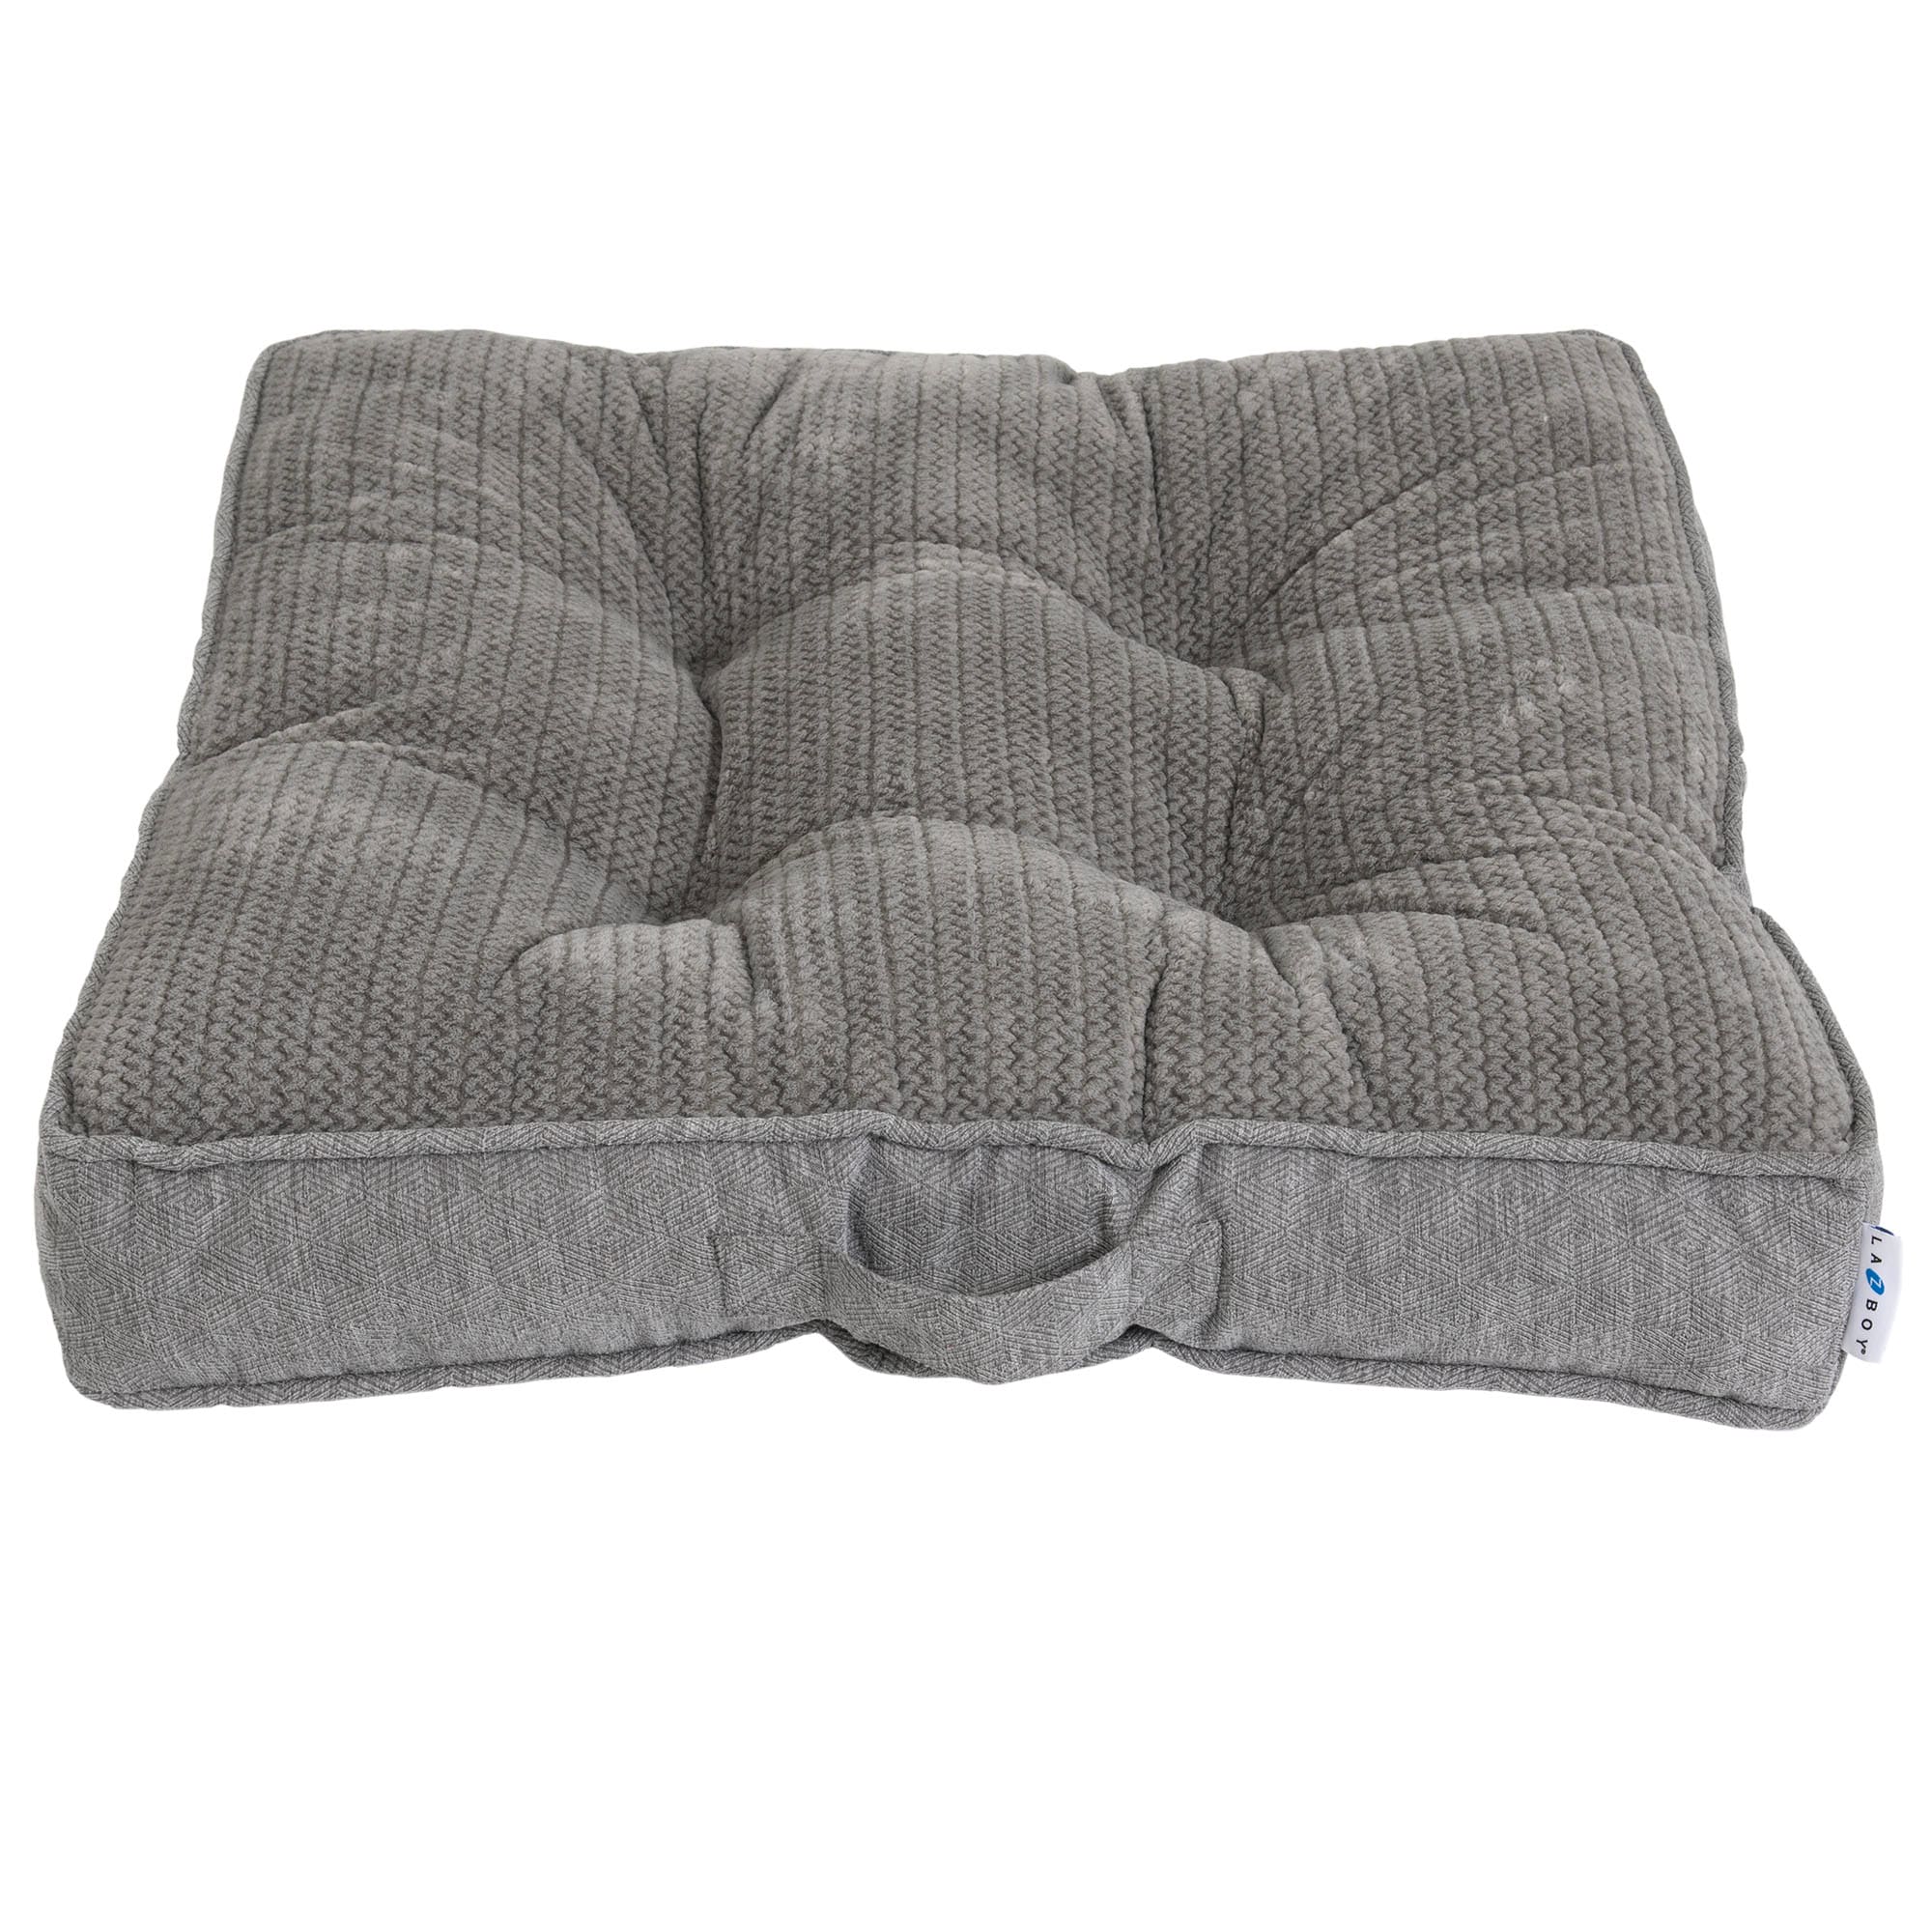 Square Gray Microfiber Pillow Dog Bed